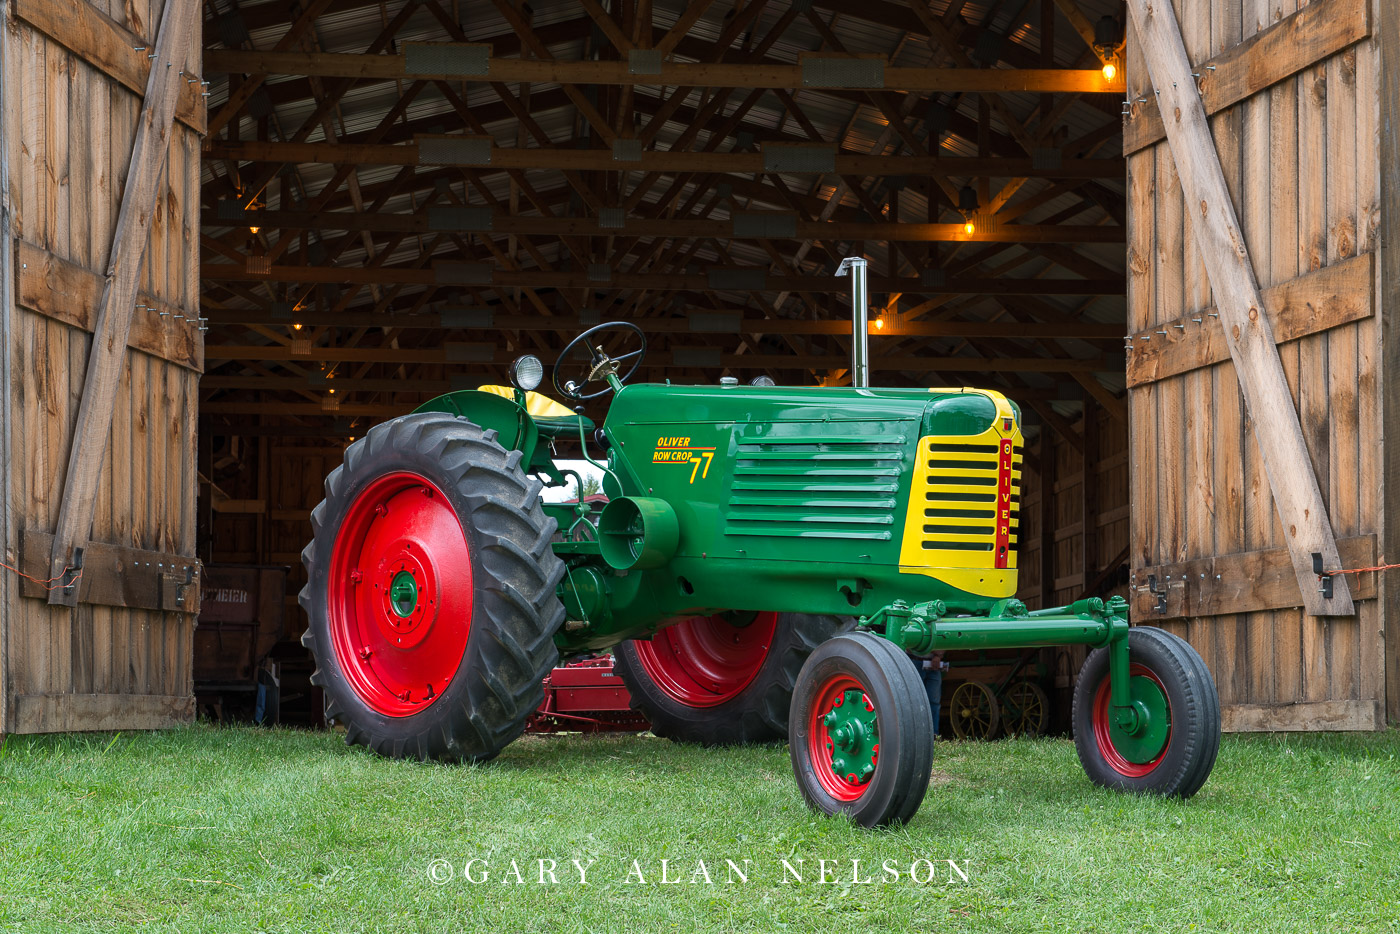 1952 Oliver 77 Row Crop with wide front